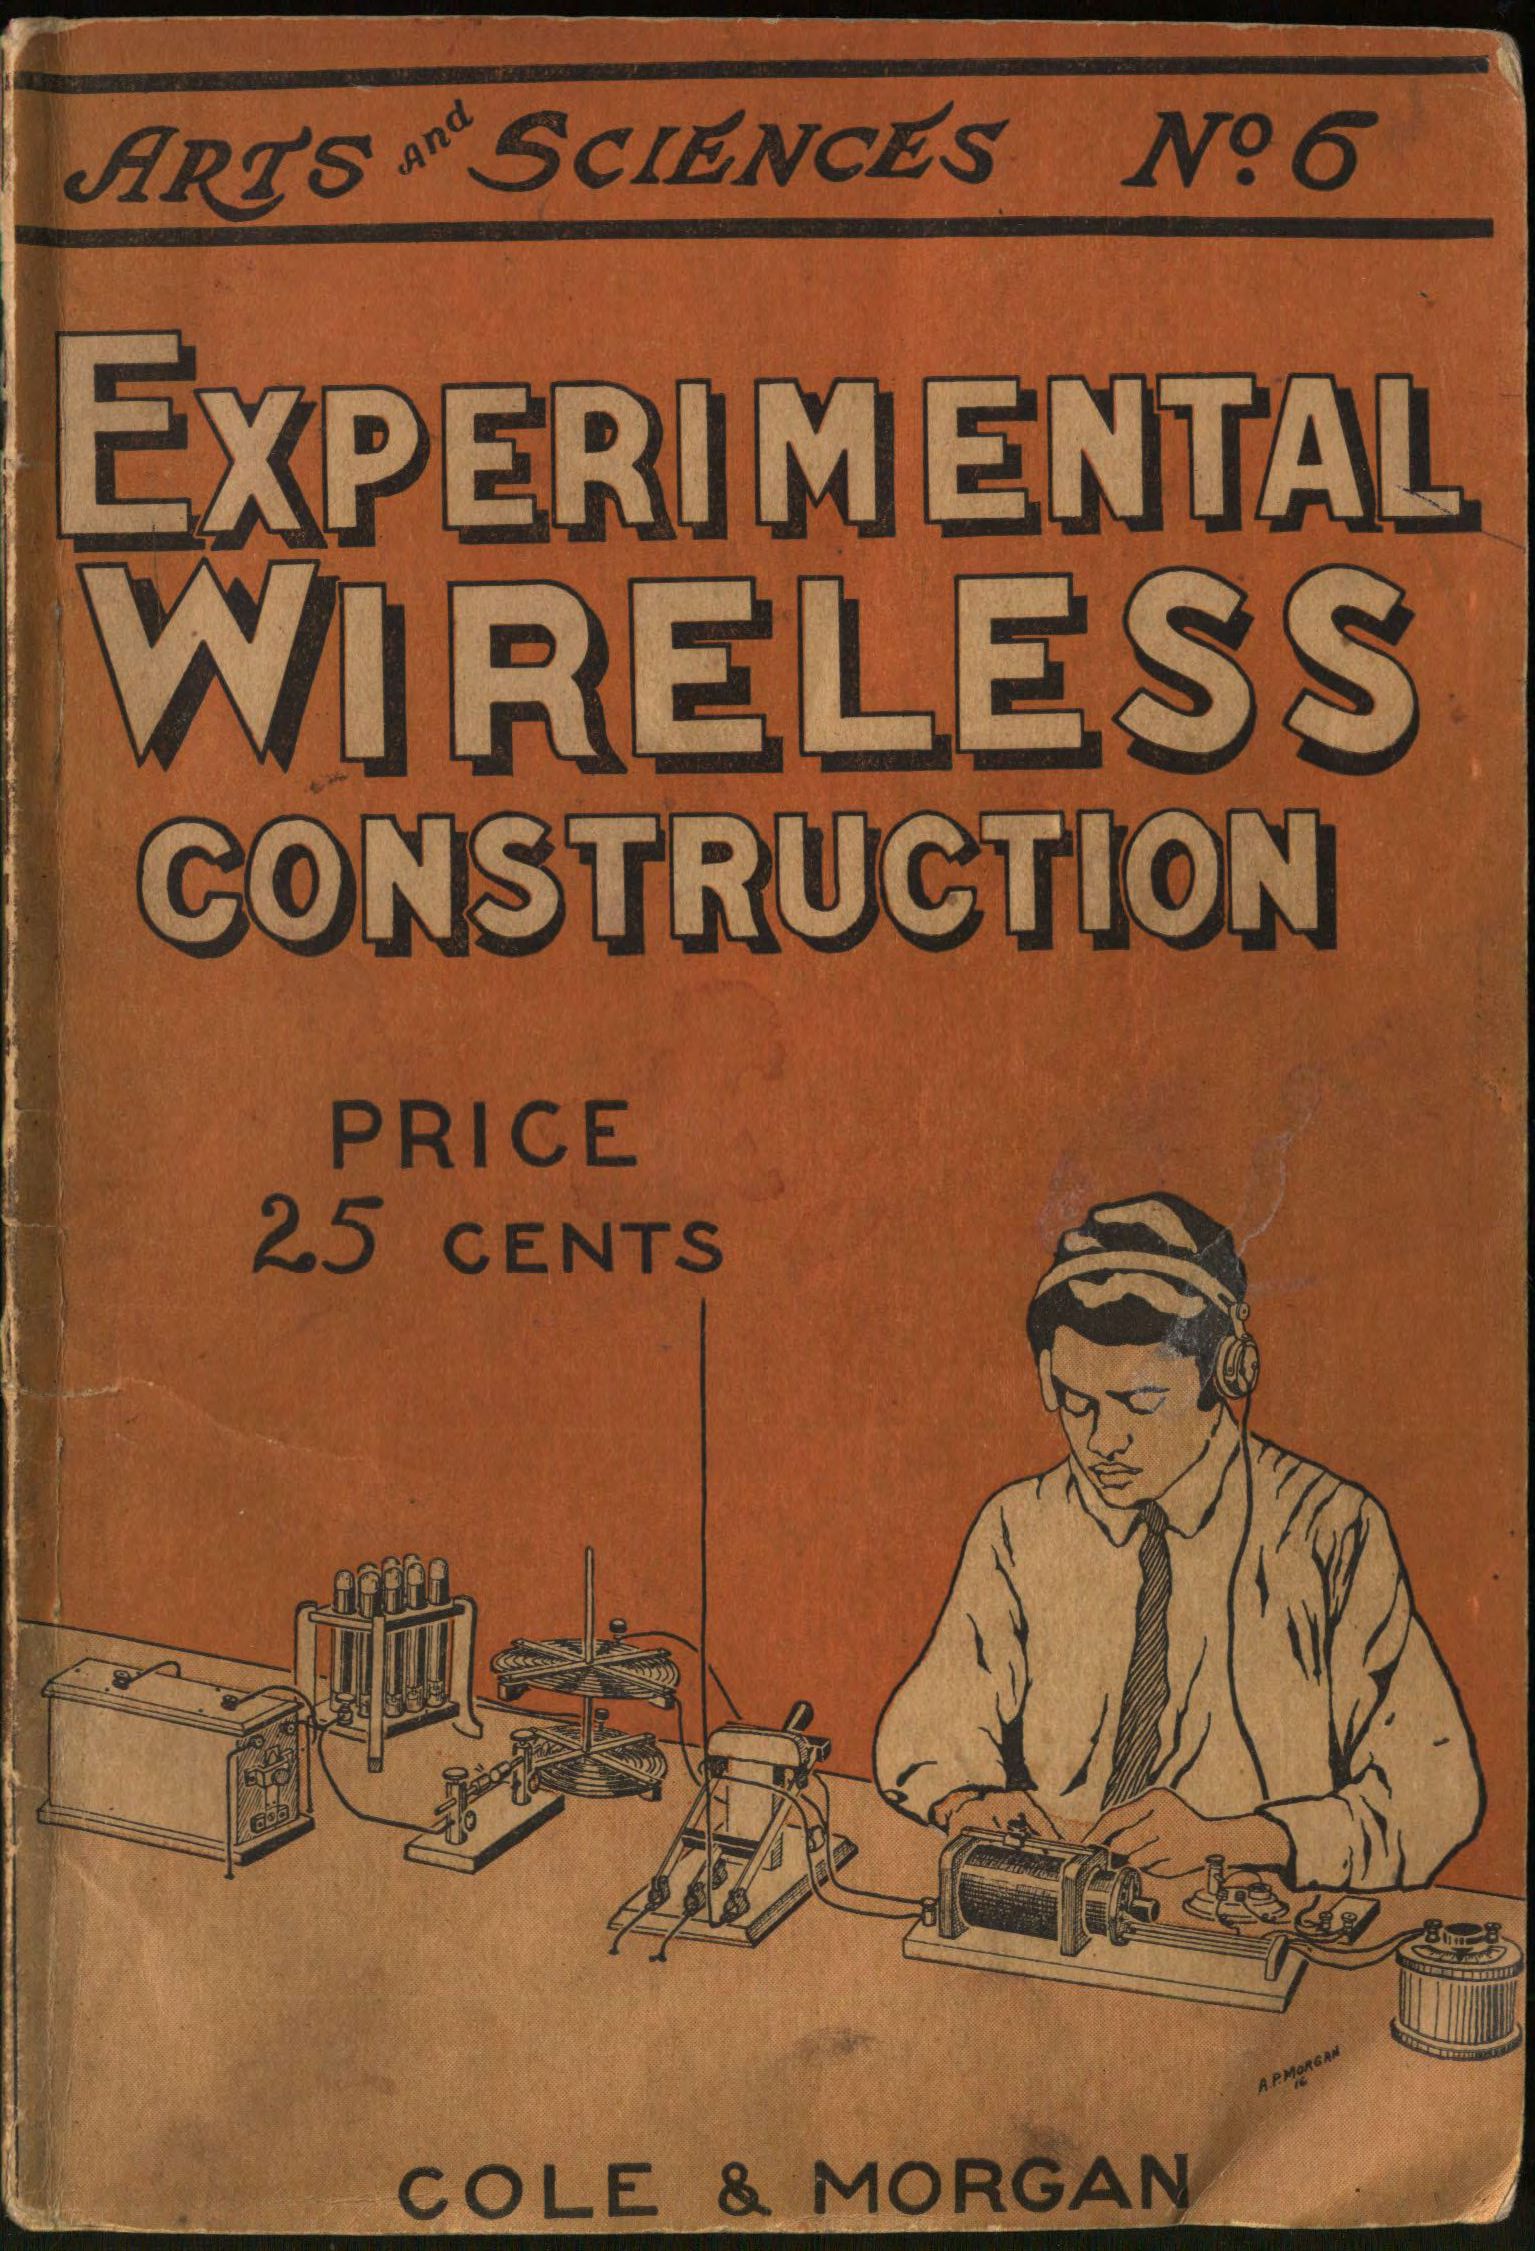 Experimental wireless constructions 1916